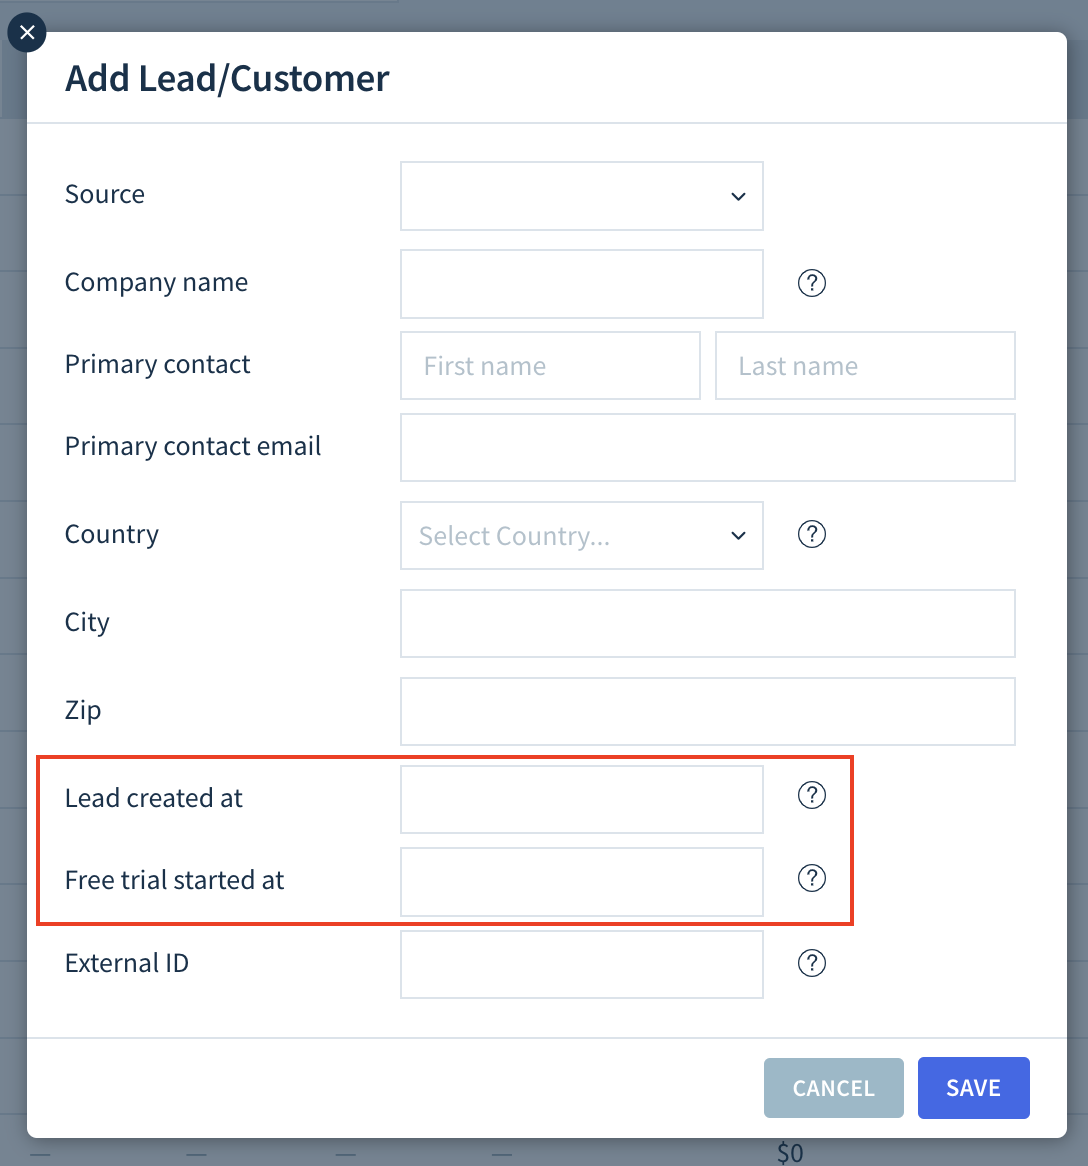 Screenshot of the Add Lead/Customer dialog with two fields highlighted: Lead created at and Free trial started at.